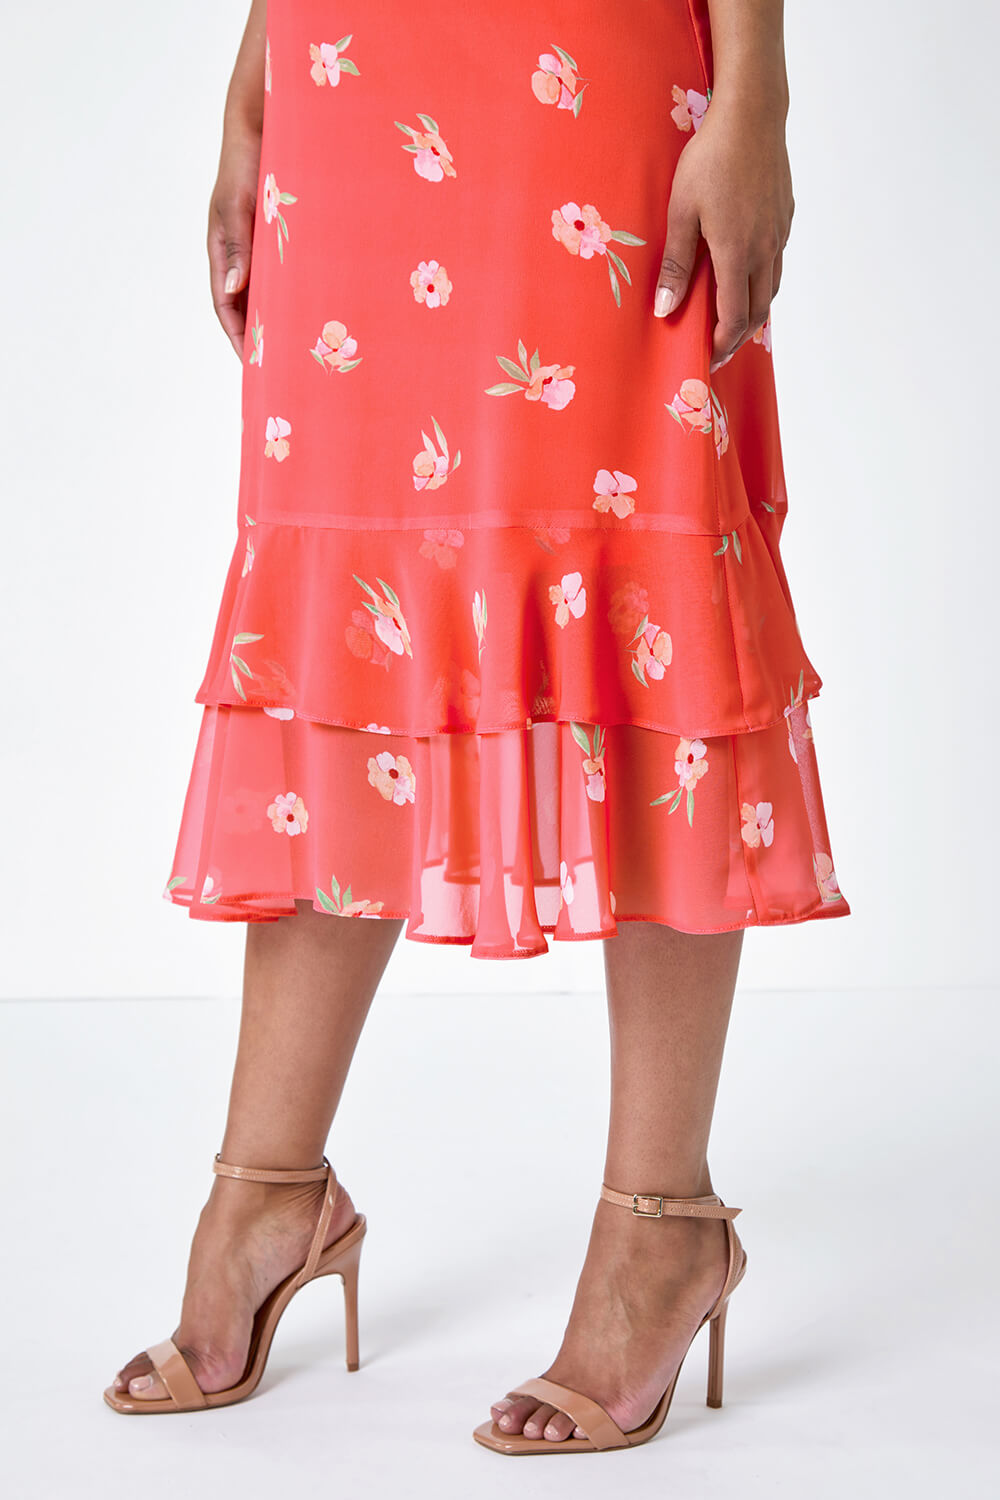 CORAL Petite Floral Chiffon Frill Tiered Midi Dress, Image 5 of 5